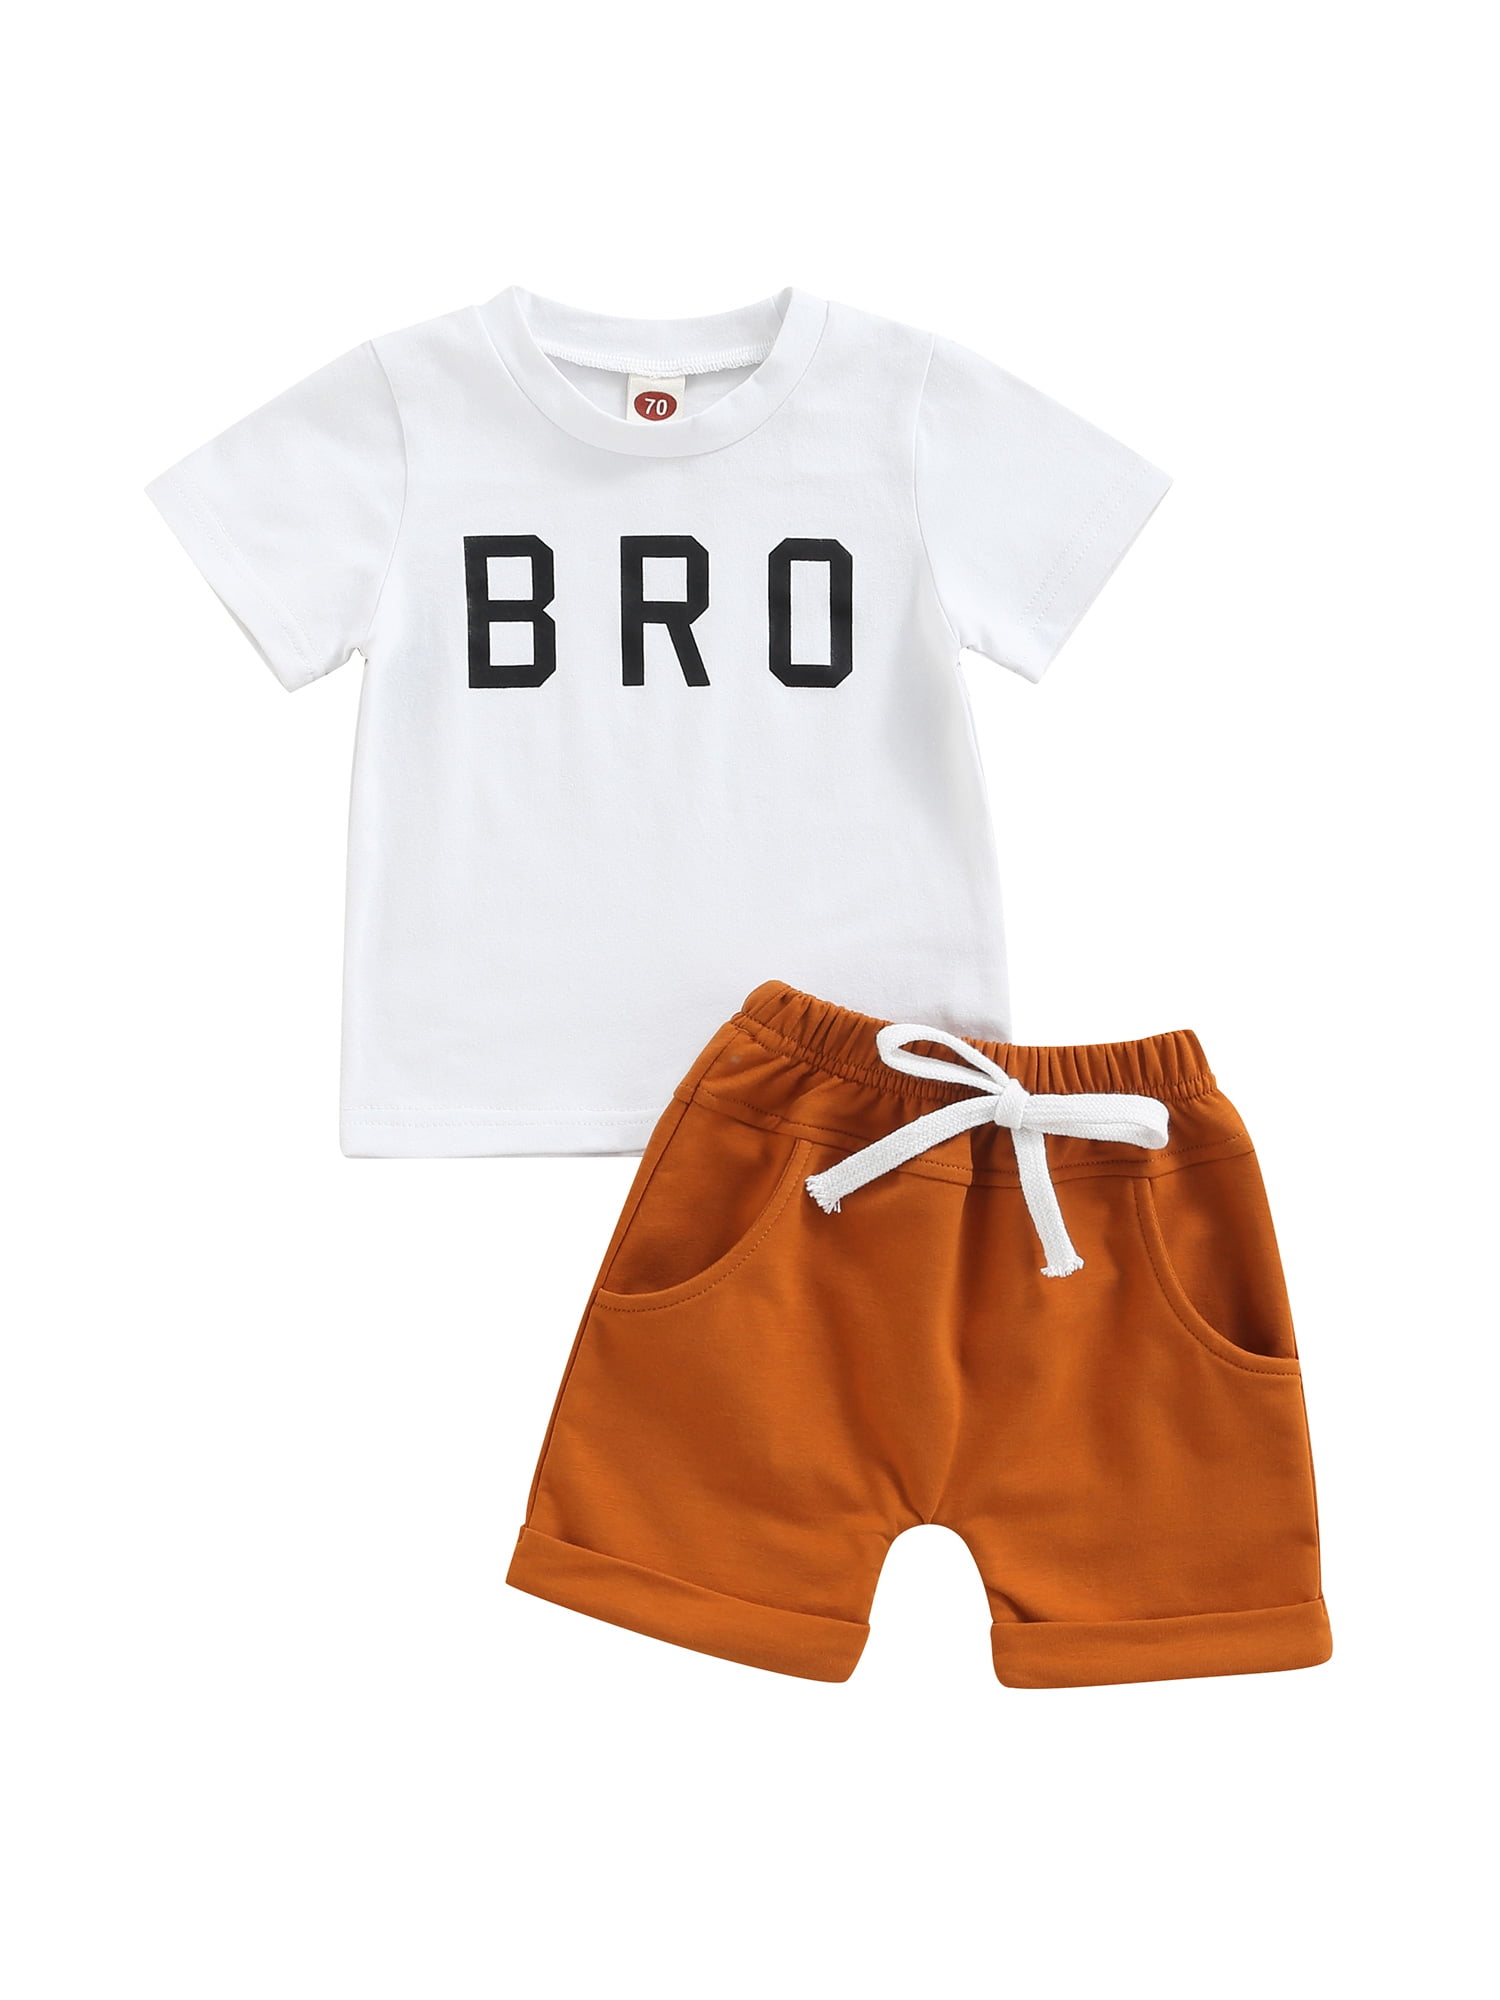 Toddler Boy Cotton Summer Short Sleeve T-Shirt and Shorts Outfit Set